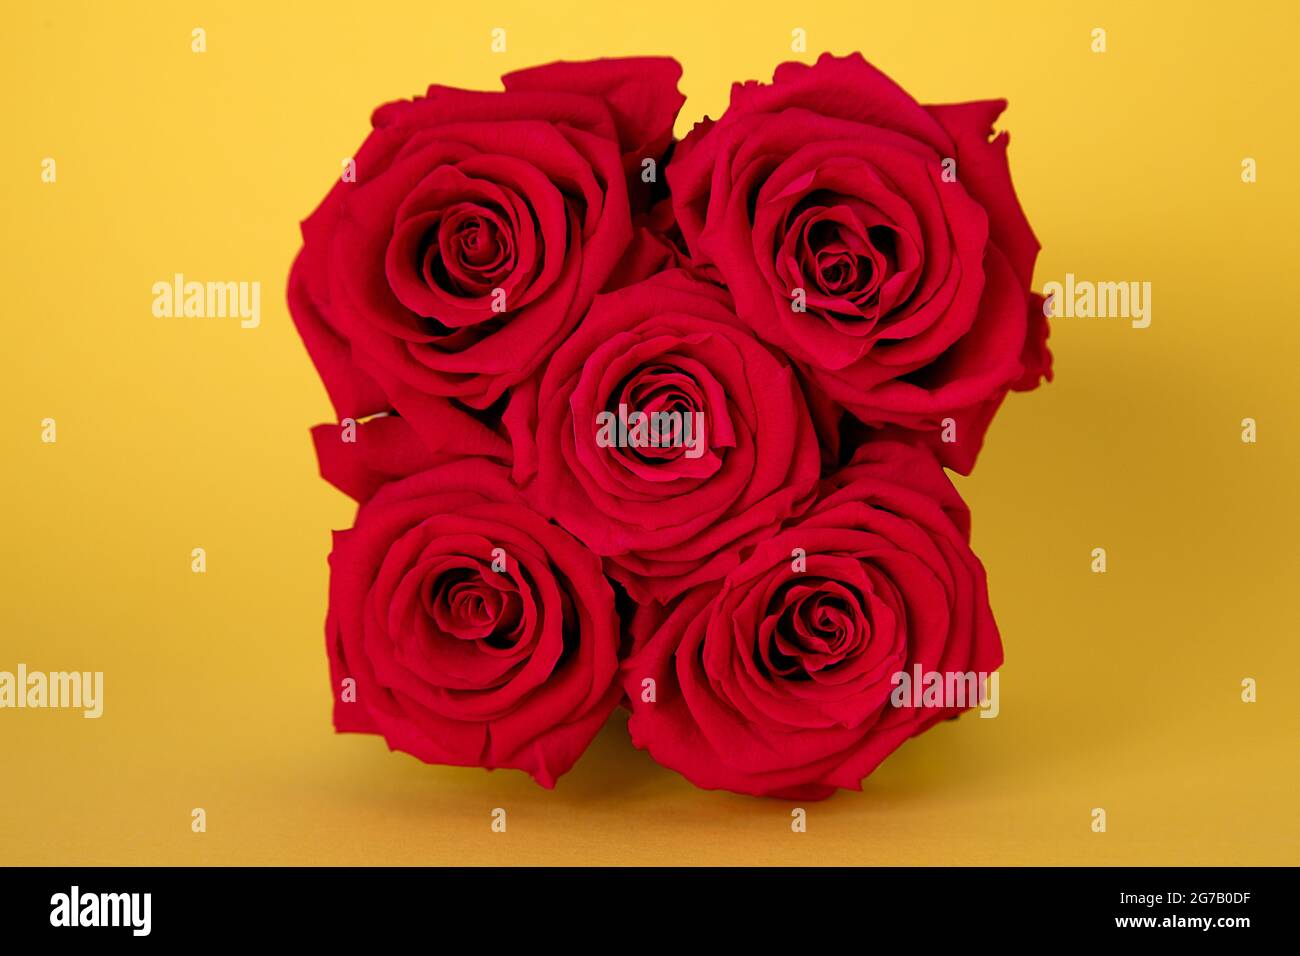 Red infinity roses on yellow background Stock Photo